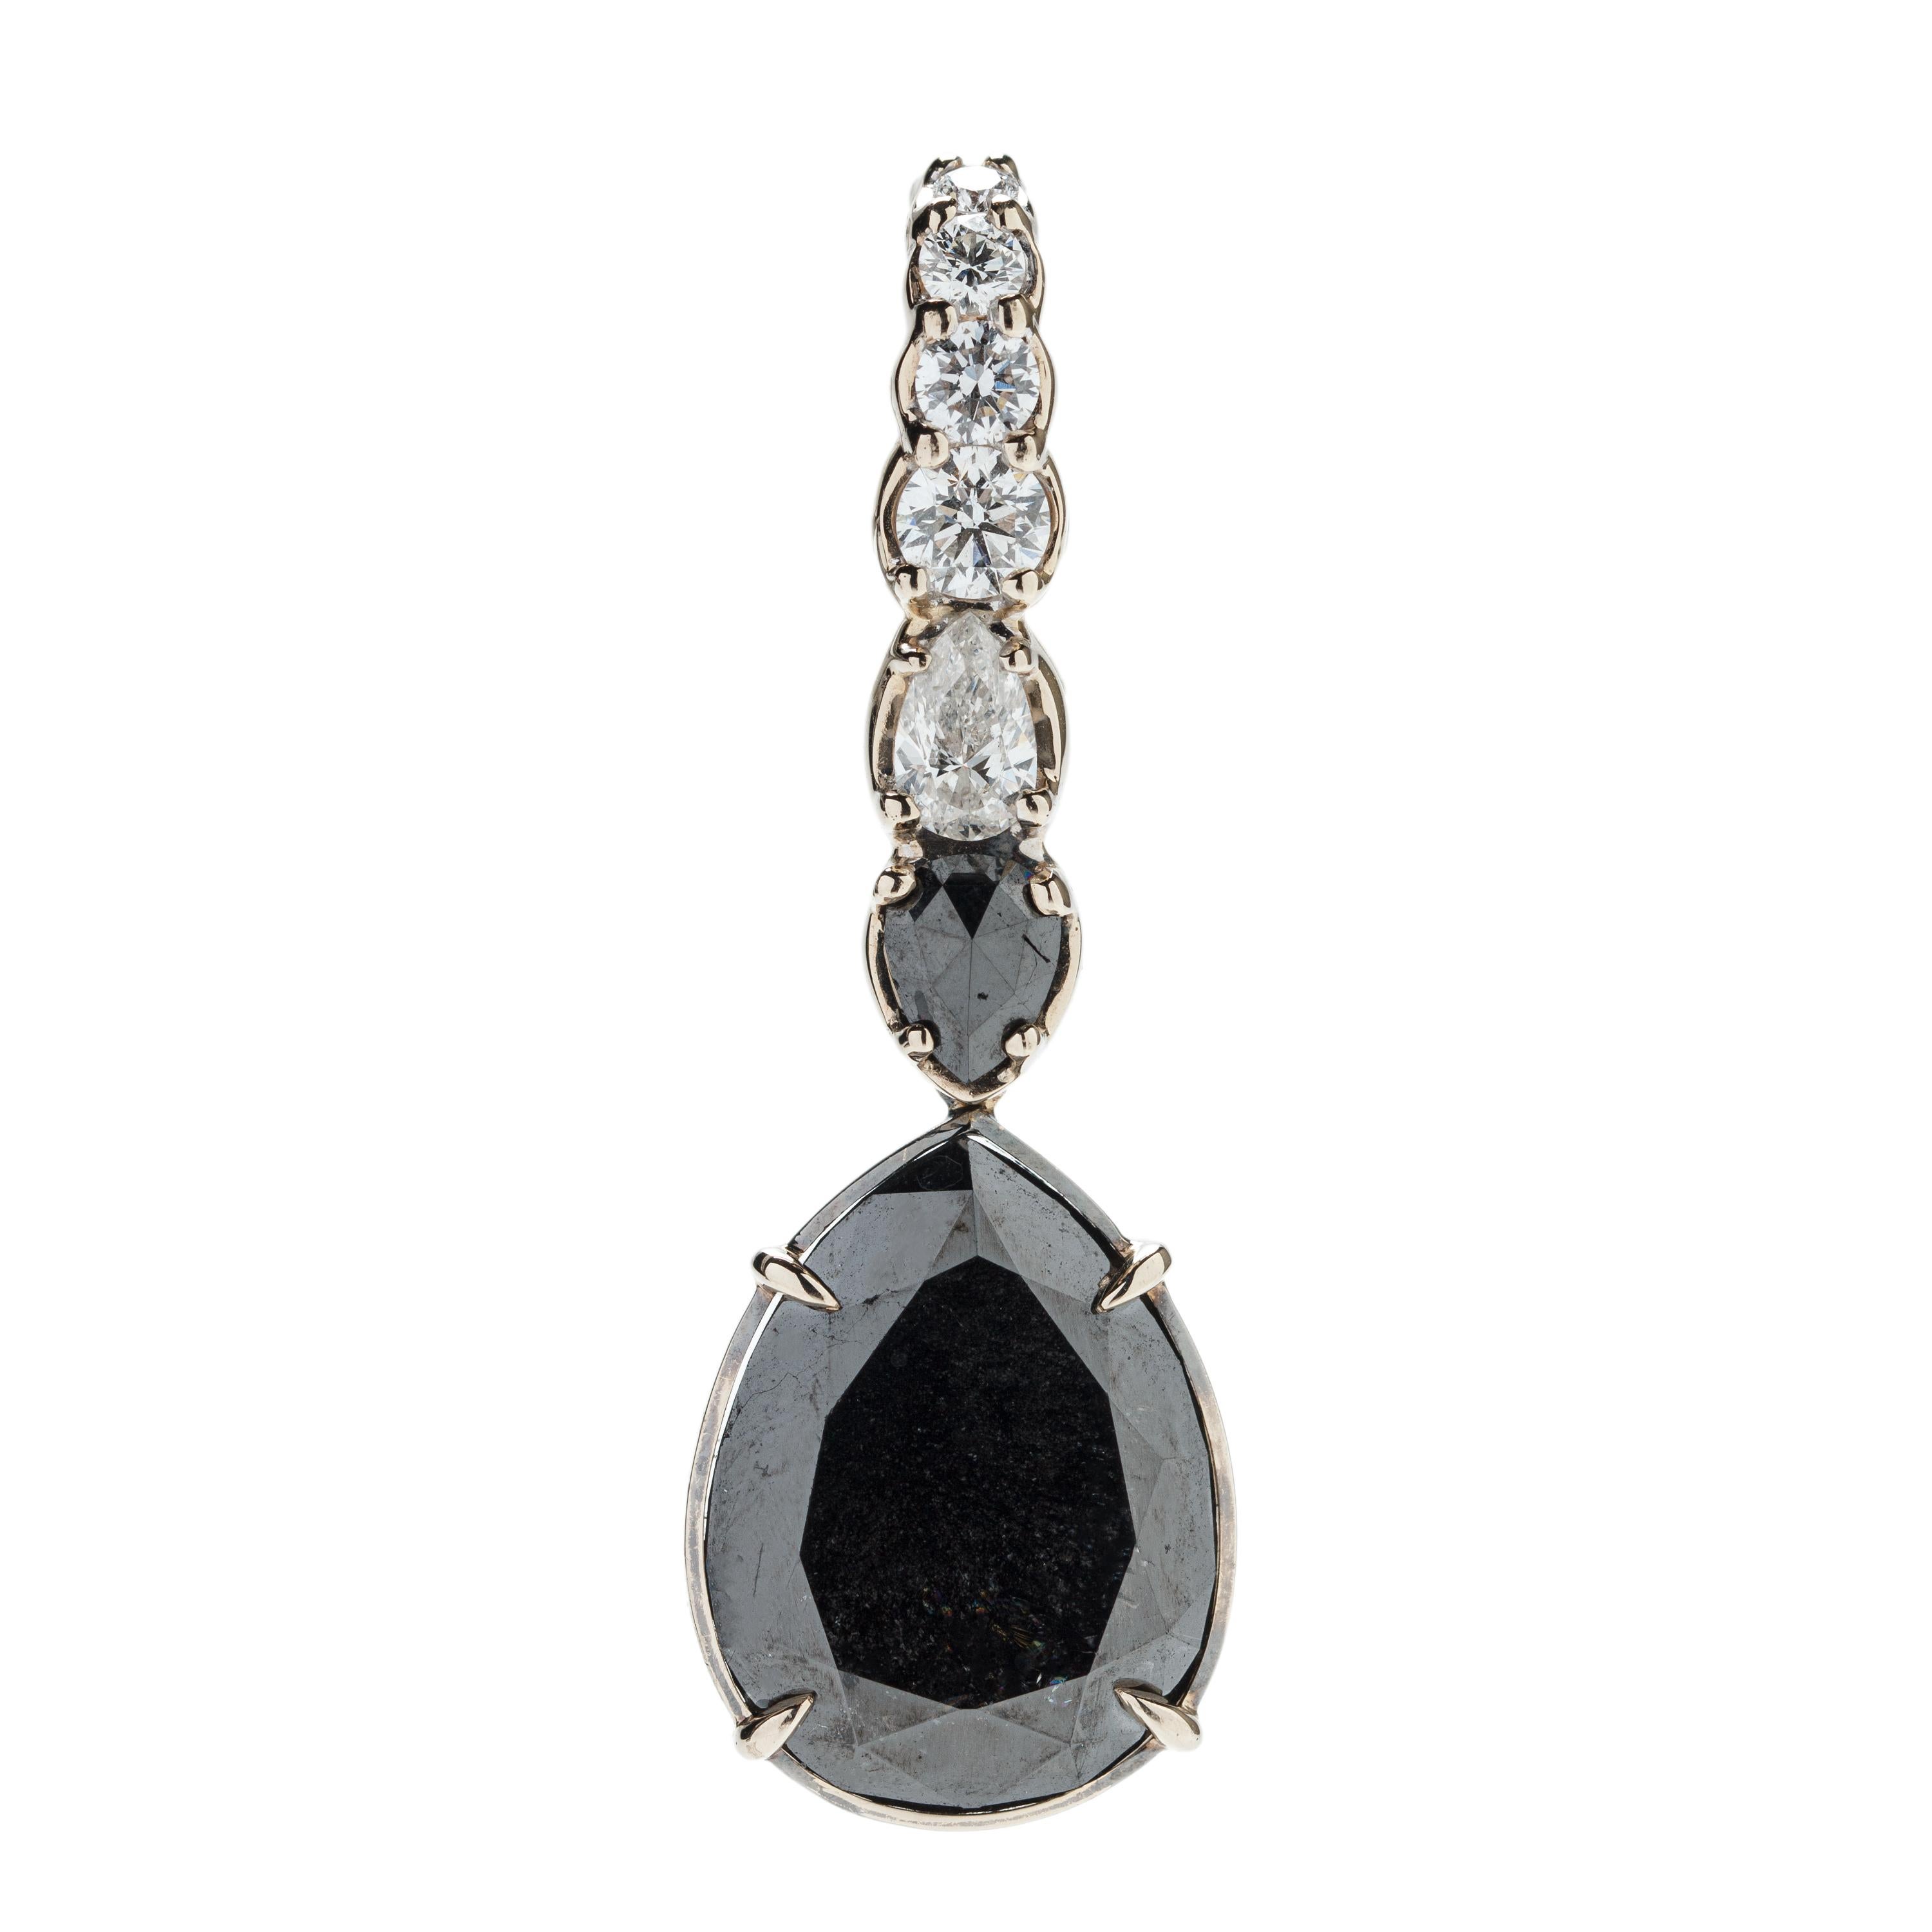 Designed exclusively by Ara Vartanian, this pair of earrings has been created in 18K White Gold, along with 47,9ct (forty-seven and nine points) worth of Black Diamonds in a drop Cut, along with a further total amount of 2,47ct (two carats and